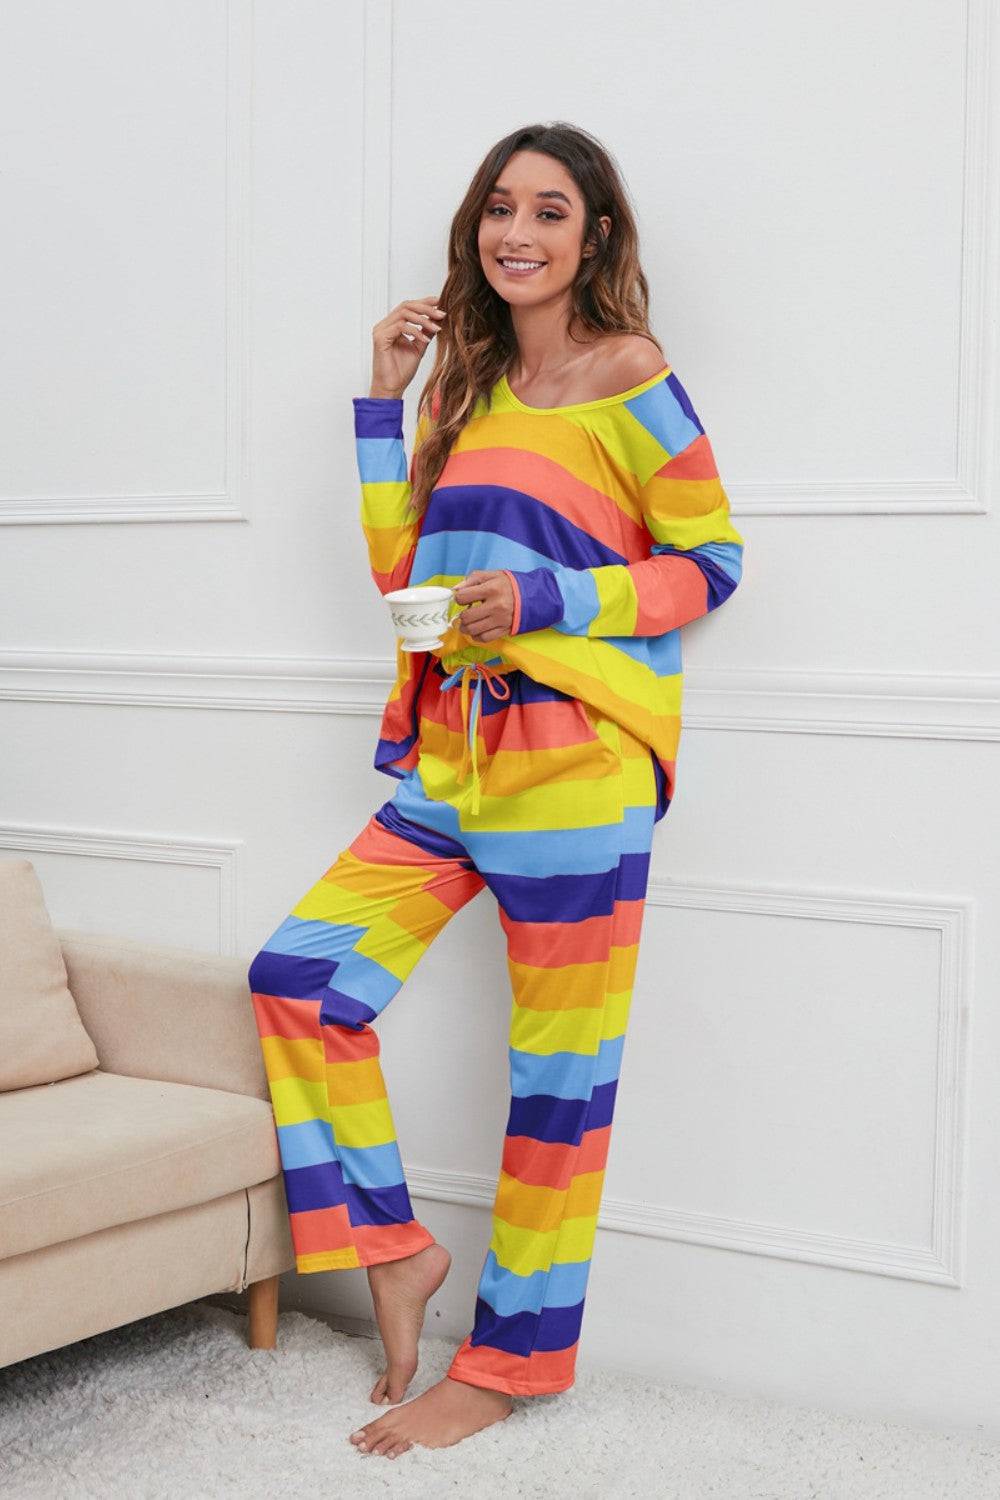 a woman in a rainbow striped outfit posing for a picture